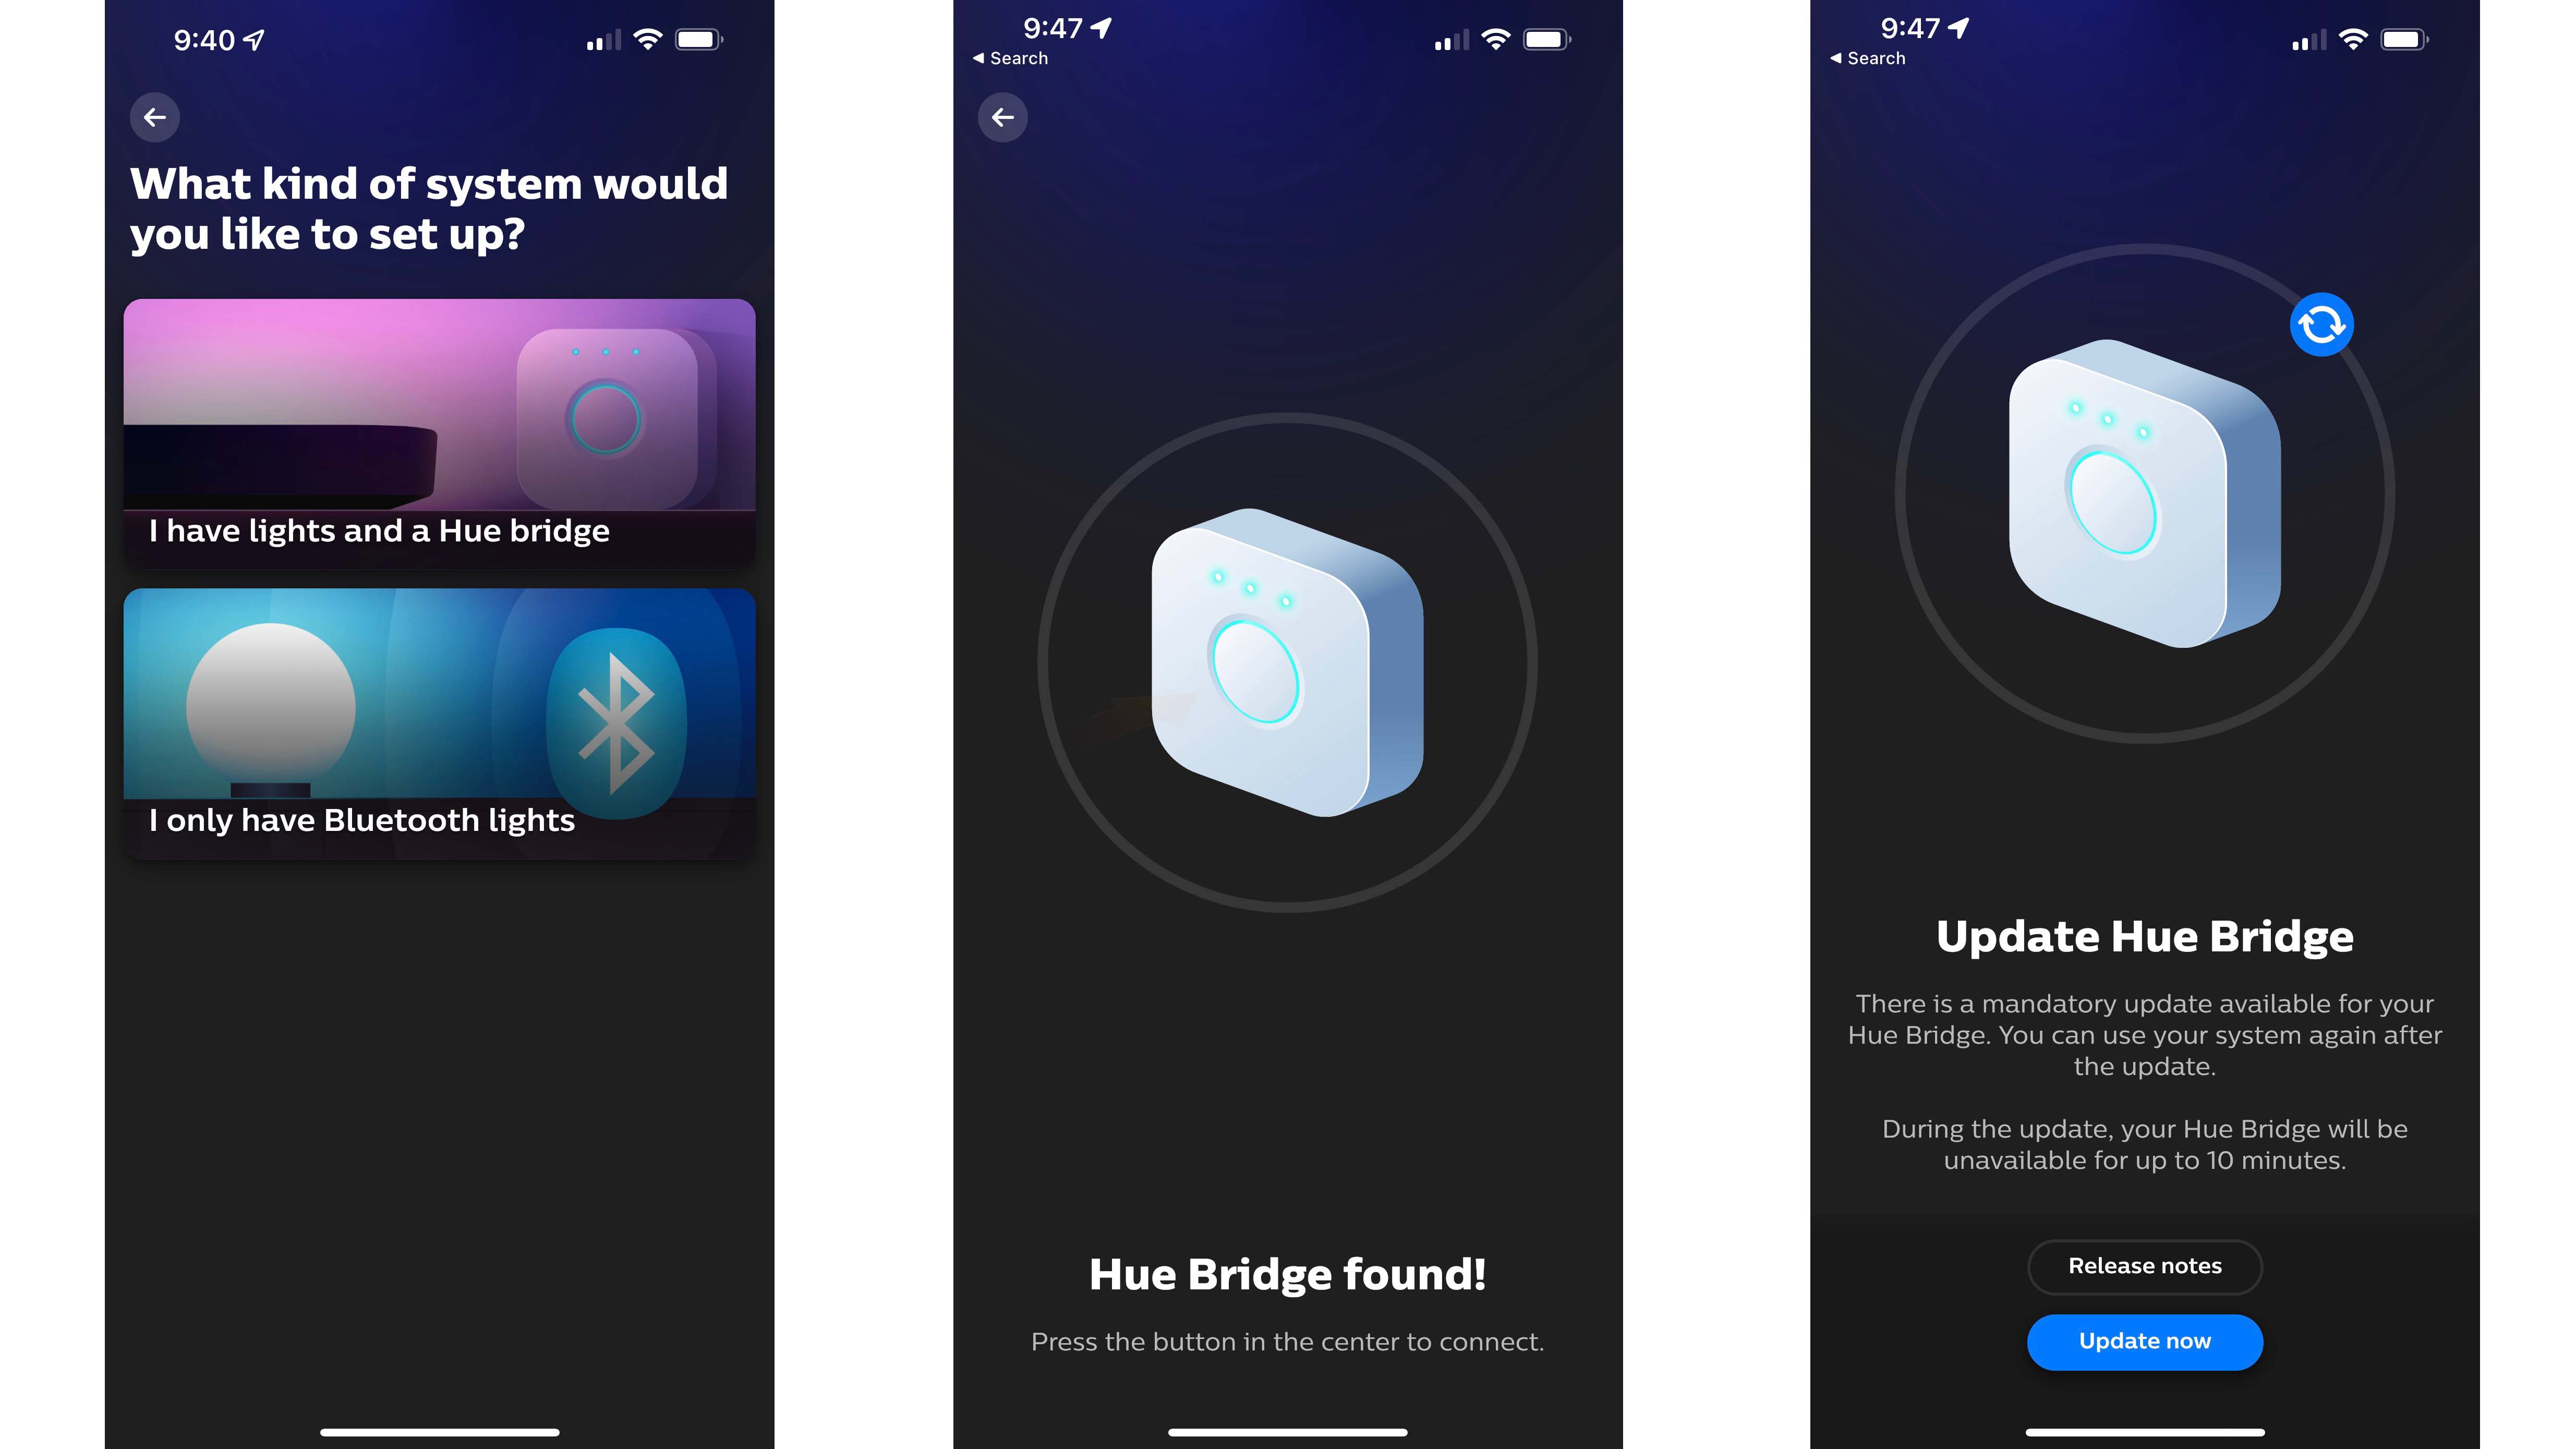 Philips Hue Bridge, Everything You Need to Know!